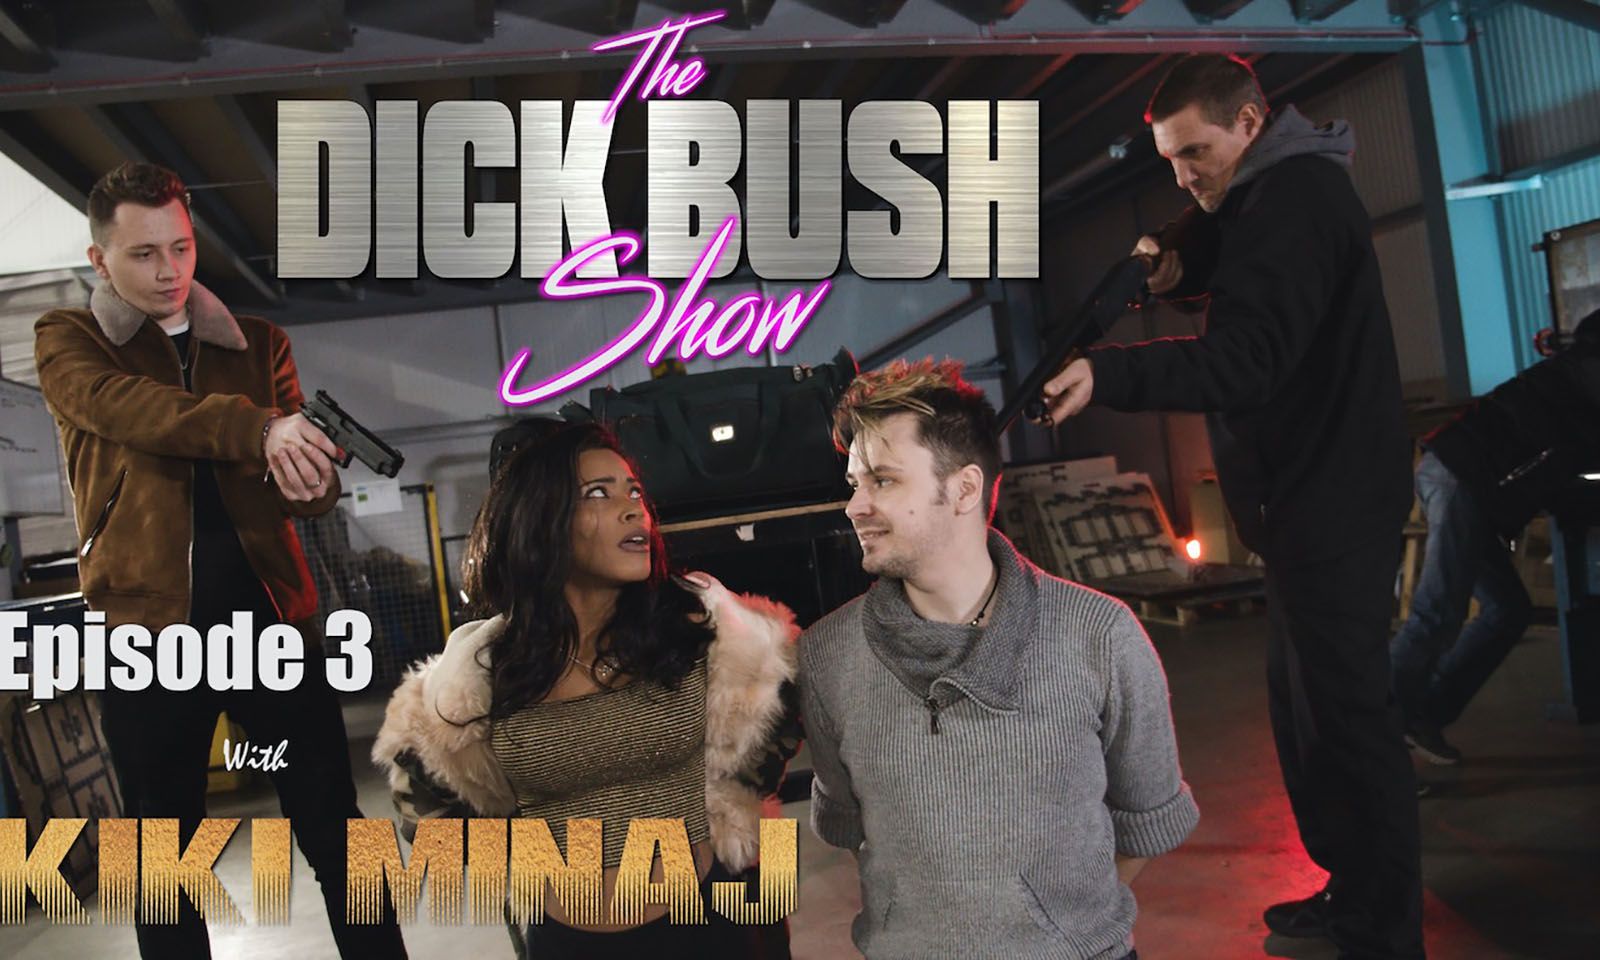 New Episode of 'Dick Bush Comedy Sketch Show' Releases on YouTube